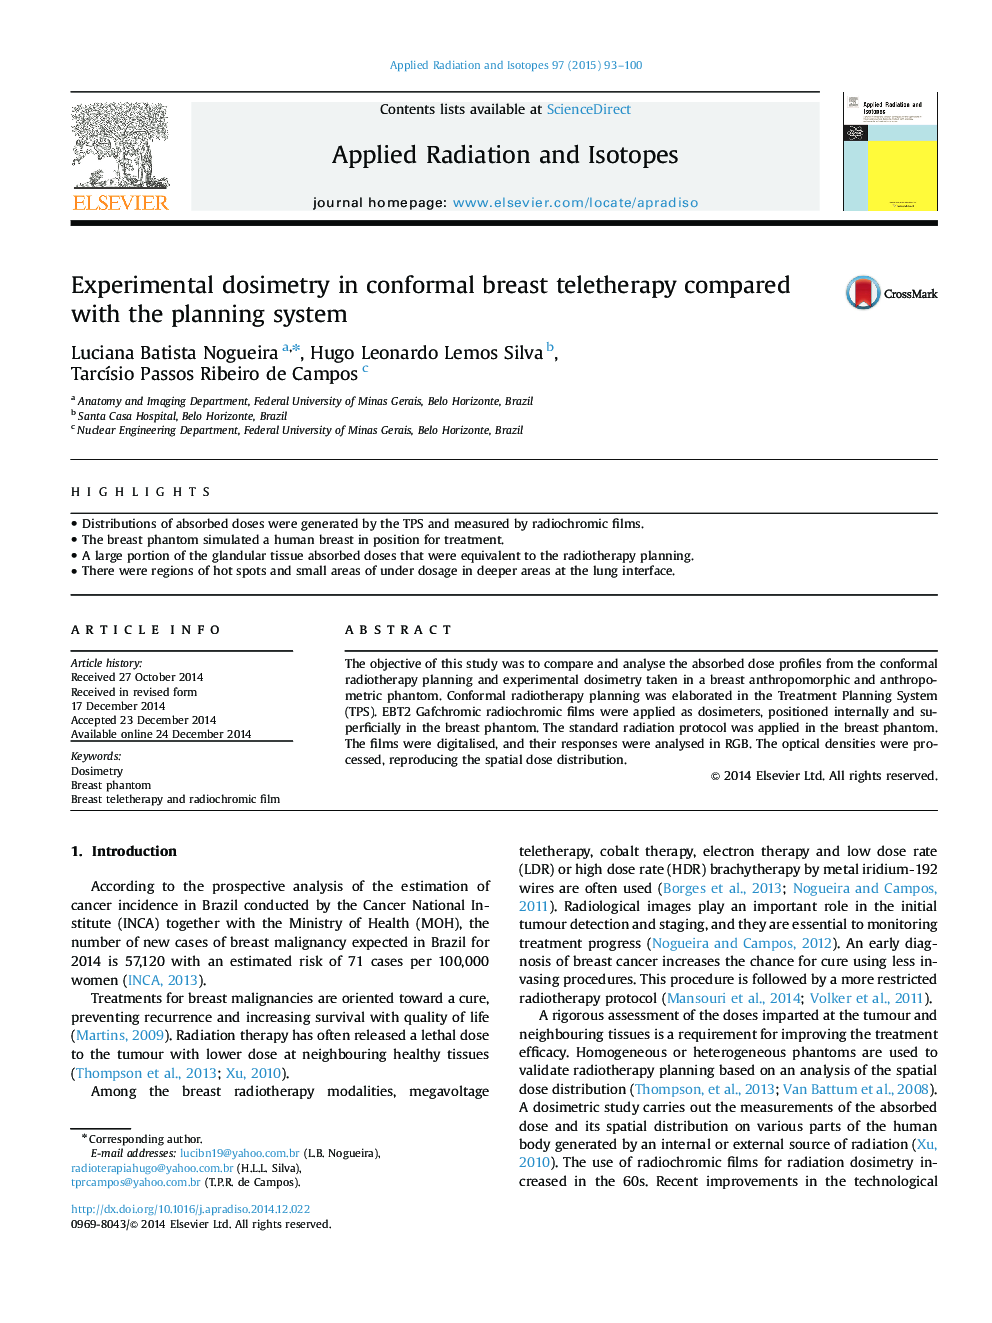 Experimental dosimetry in conformal breast teletherapy compared with the planning system